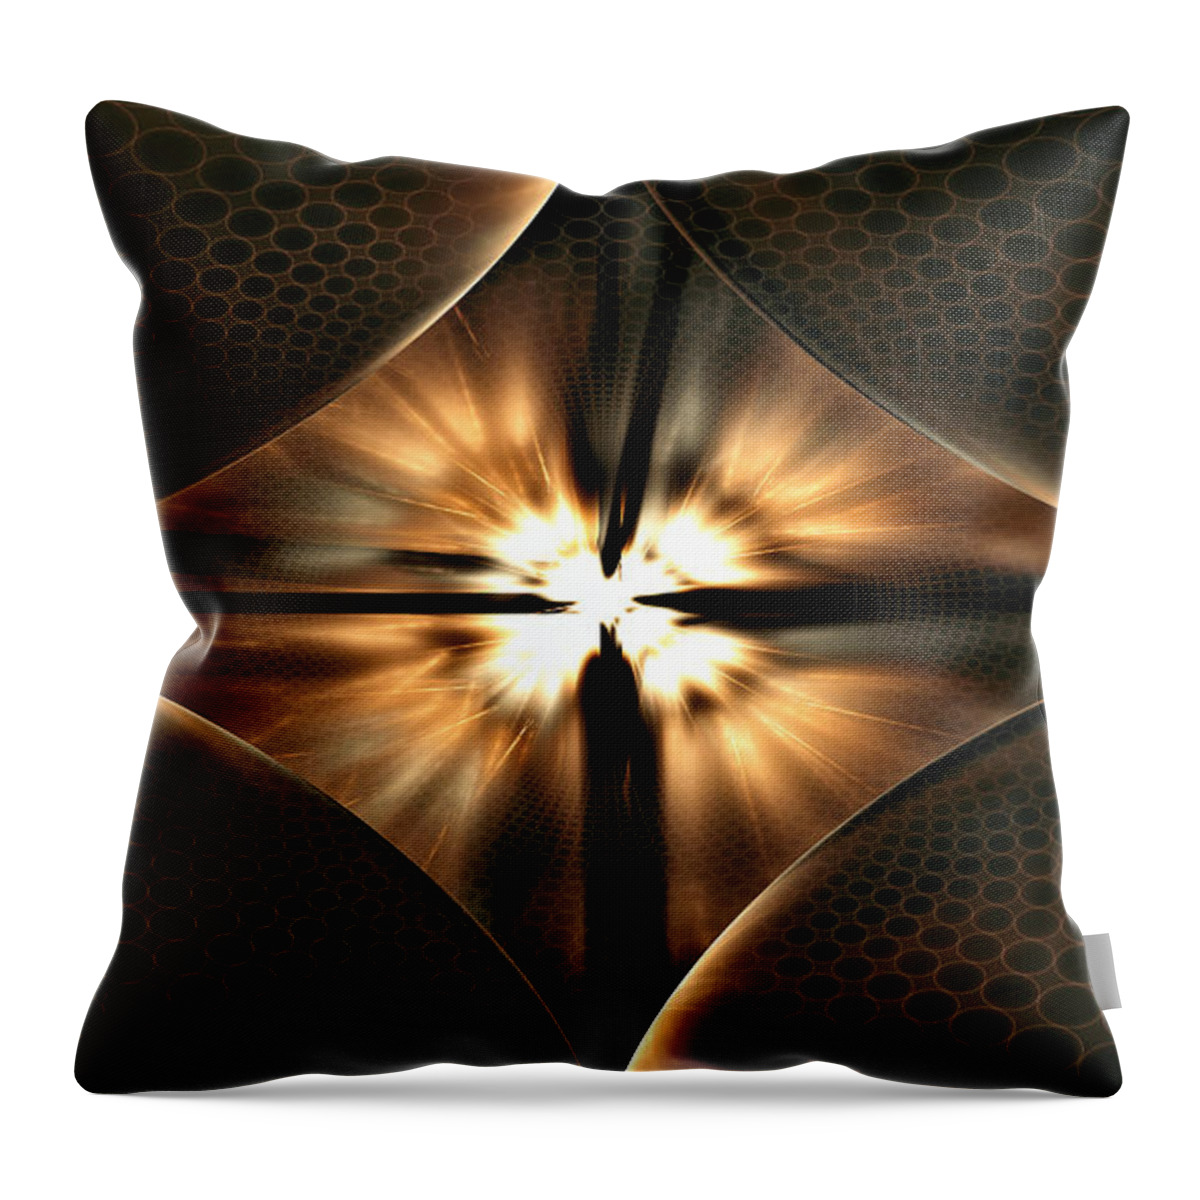 Ephesians Throw Pillow featuring the digital art Ephesians by Missy Gainer